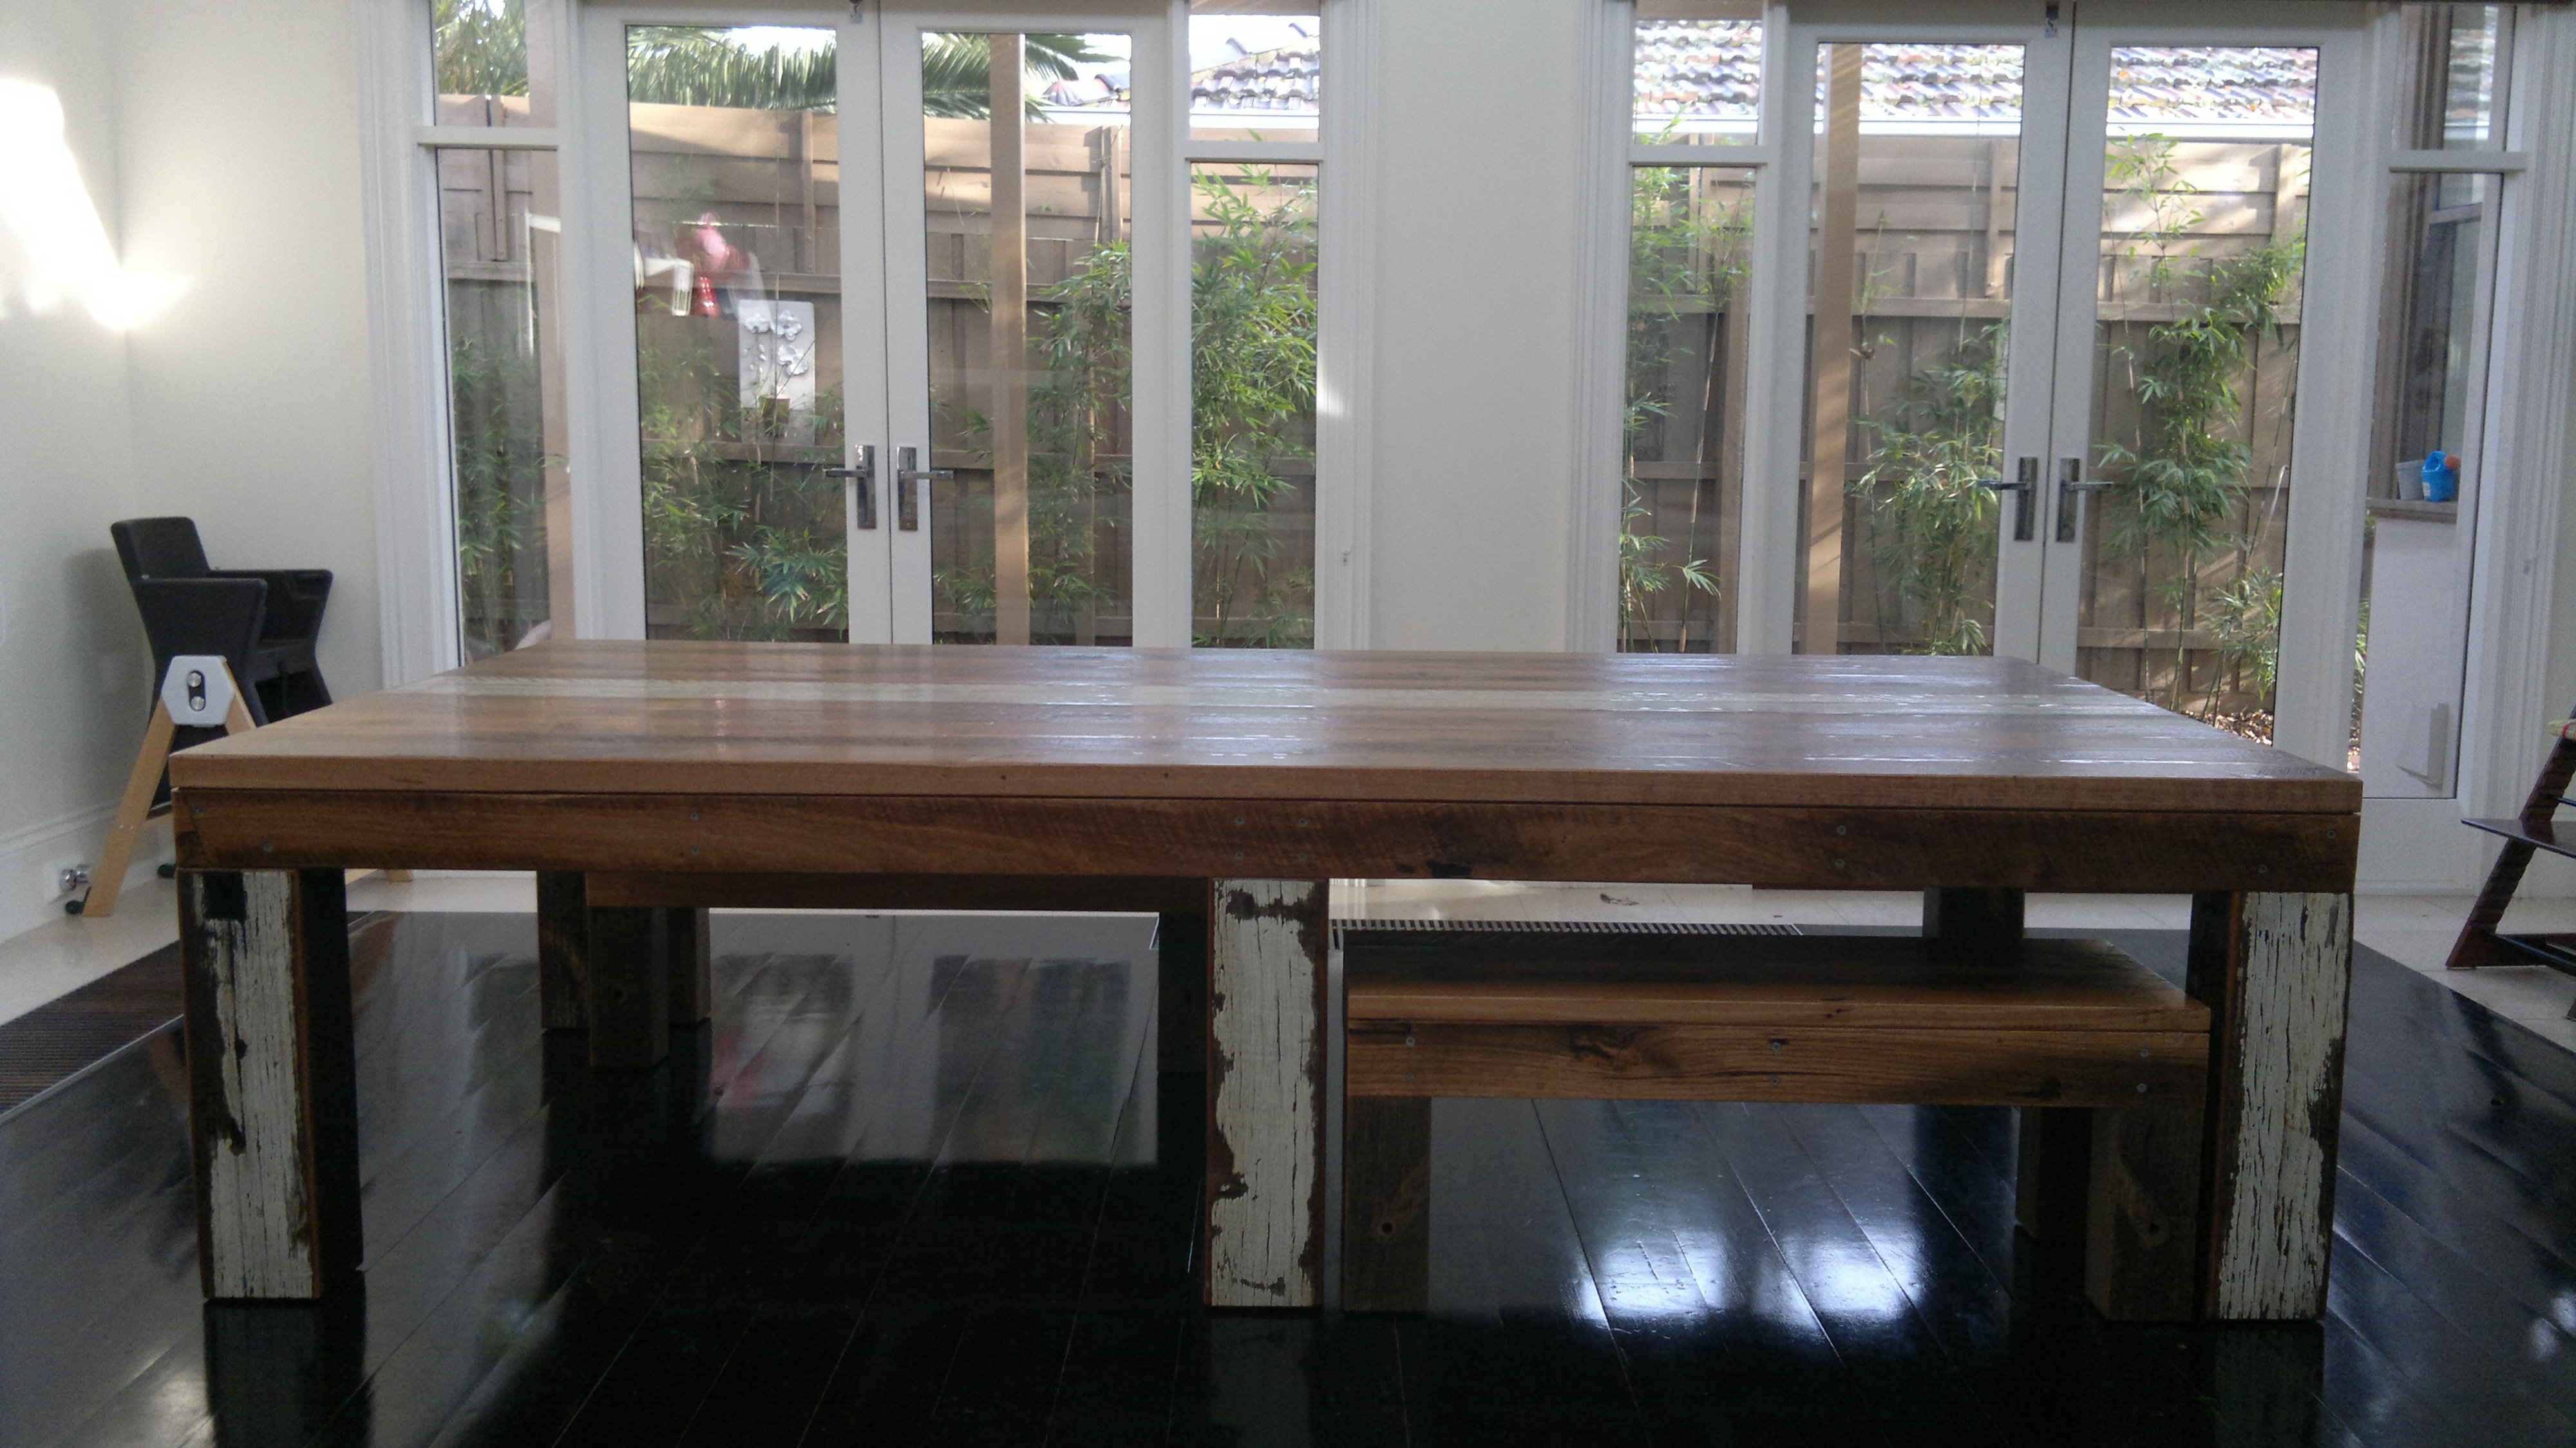 Semi Industrial:Rustic Dining Table 12-14 Seater Side View - Recycled Lane